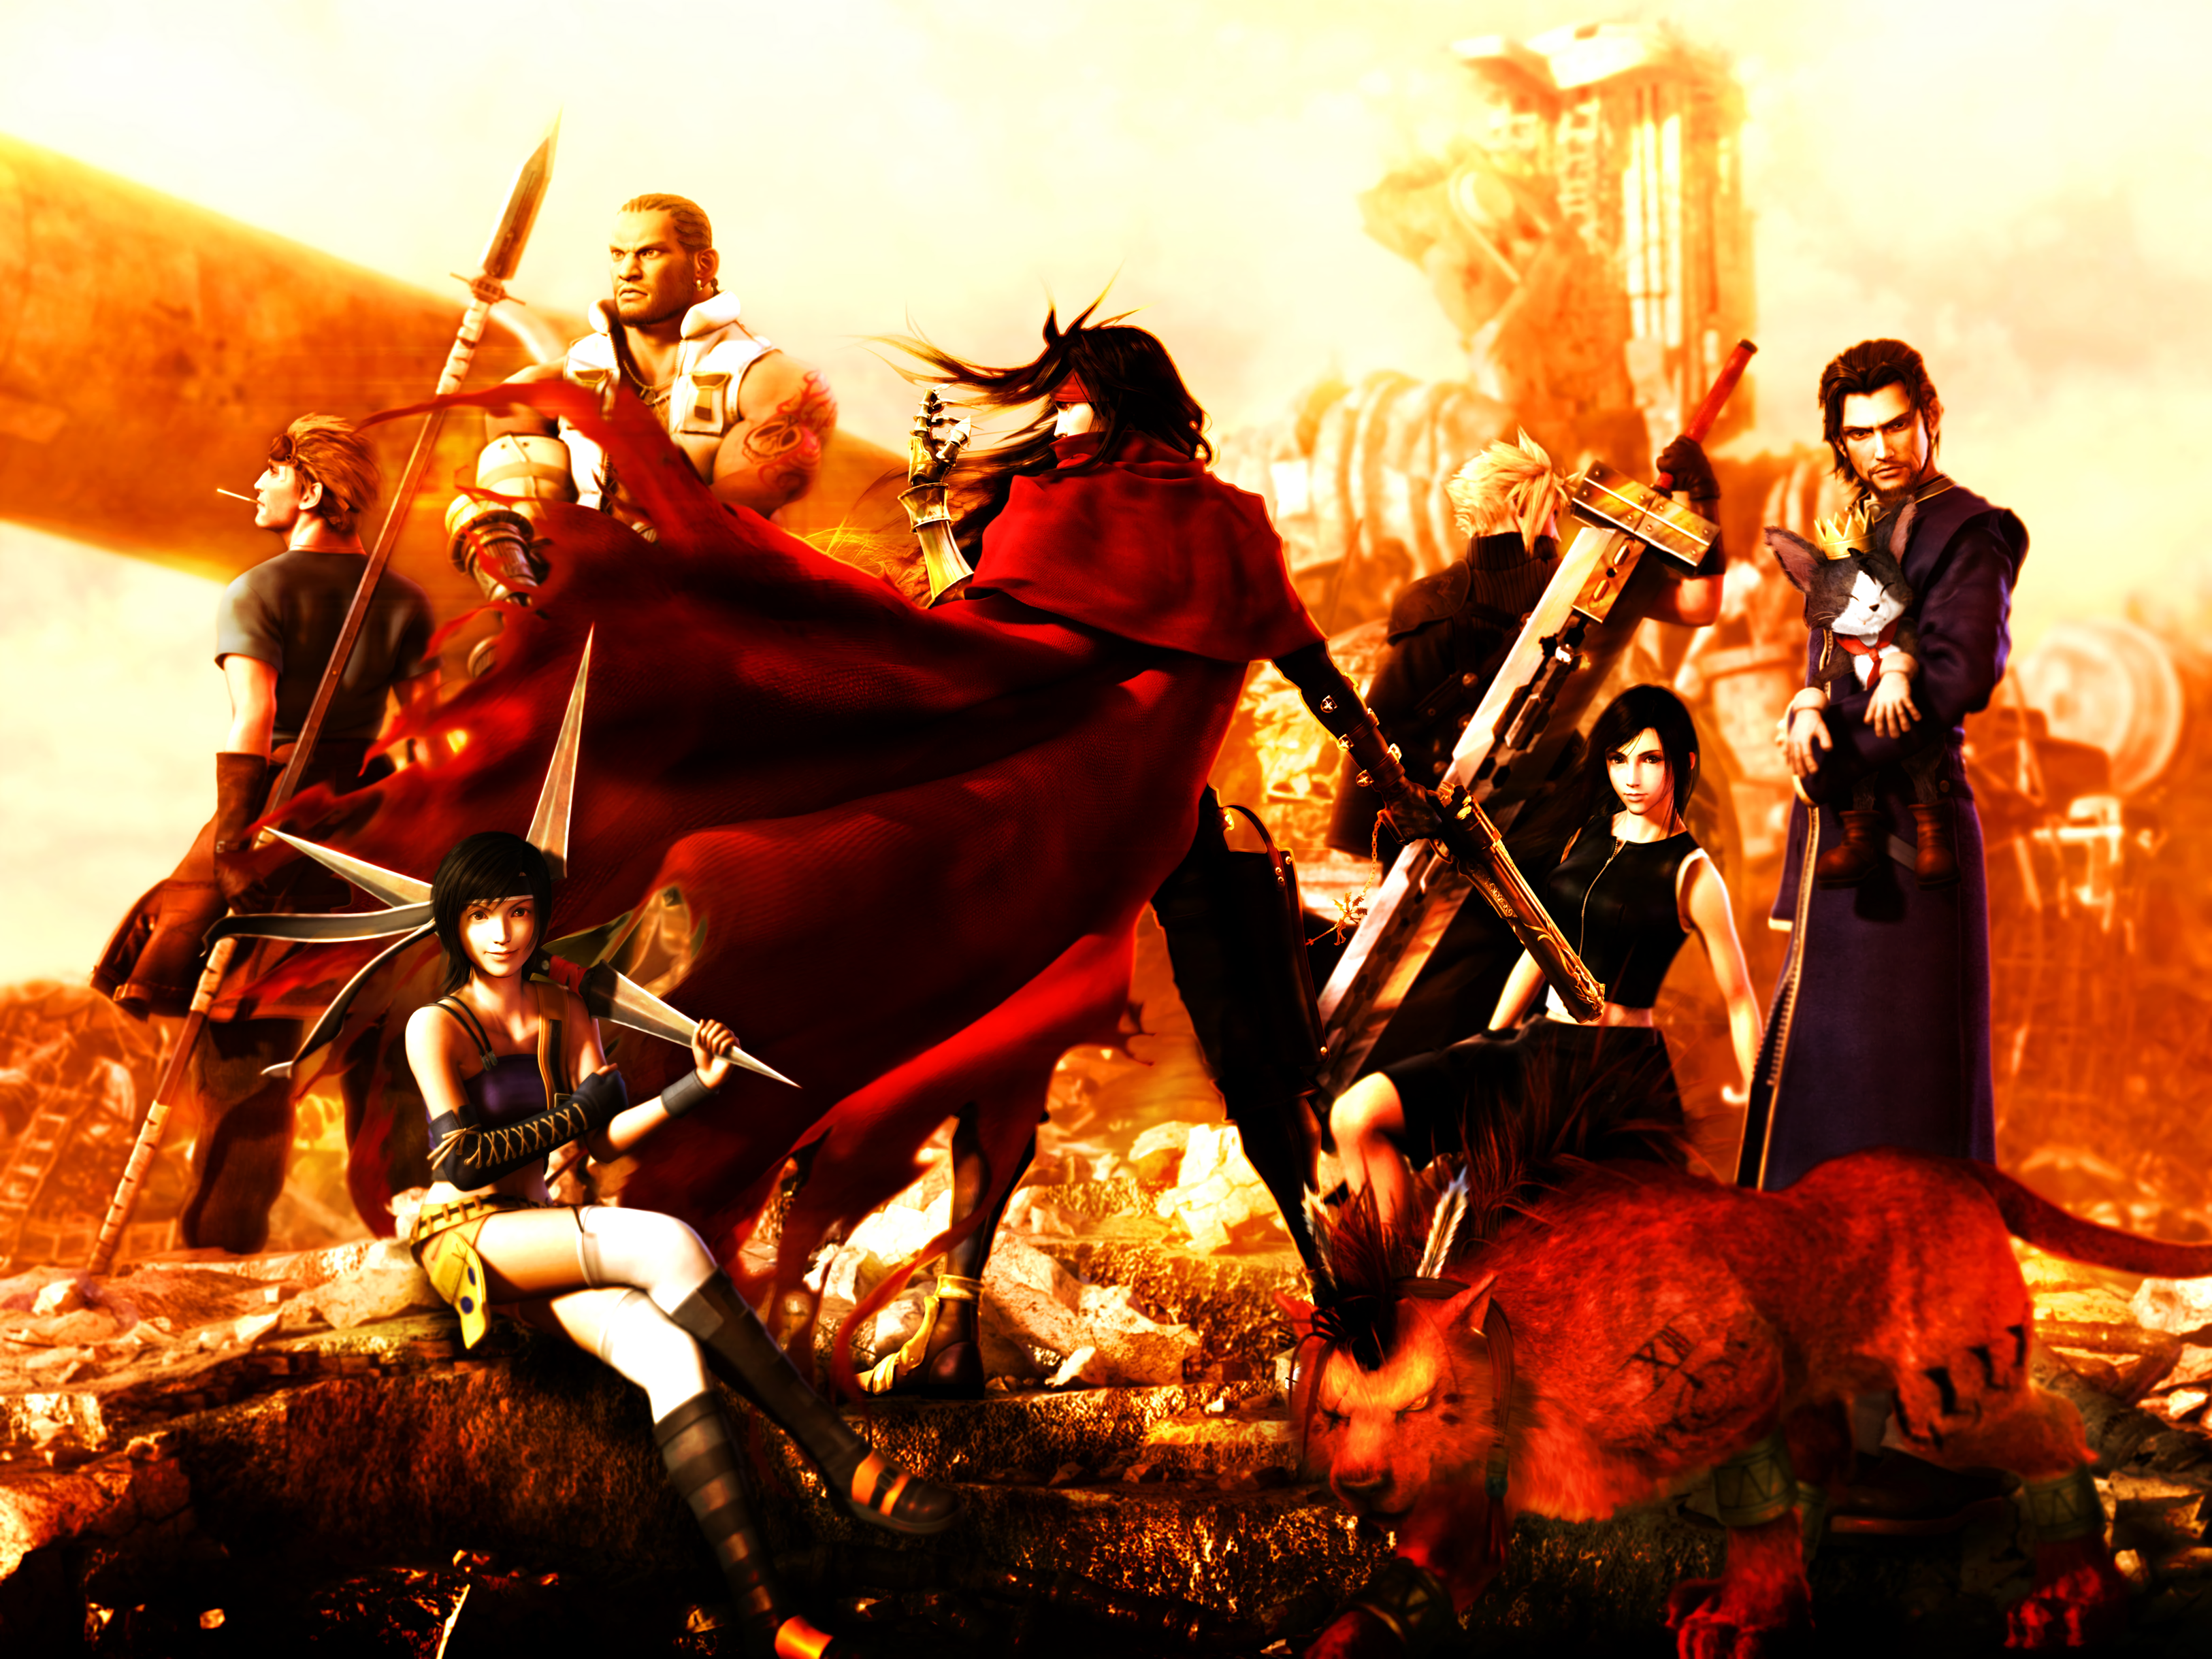 Barret Wallace Cait Sith Cid Highwind Cloud Strife Dirge Of Cerberus Final Fantasy Vii Red Xiii Reev 3250x2438